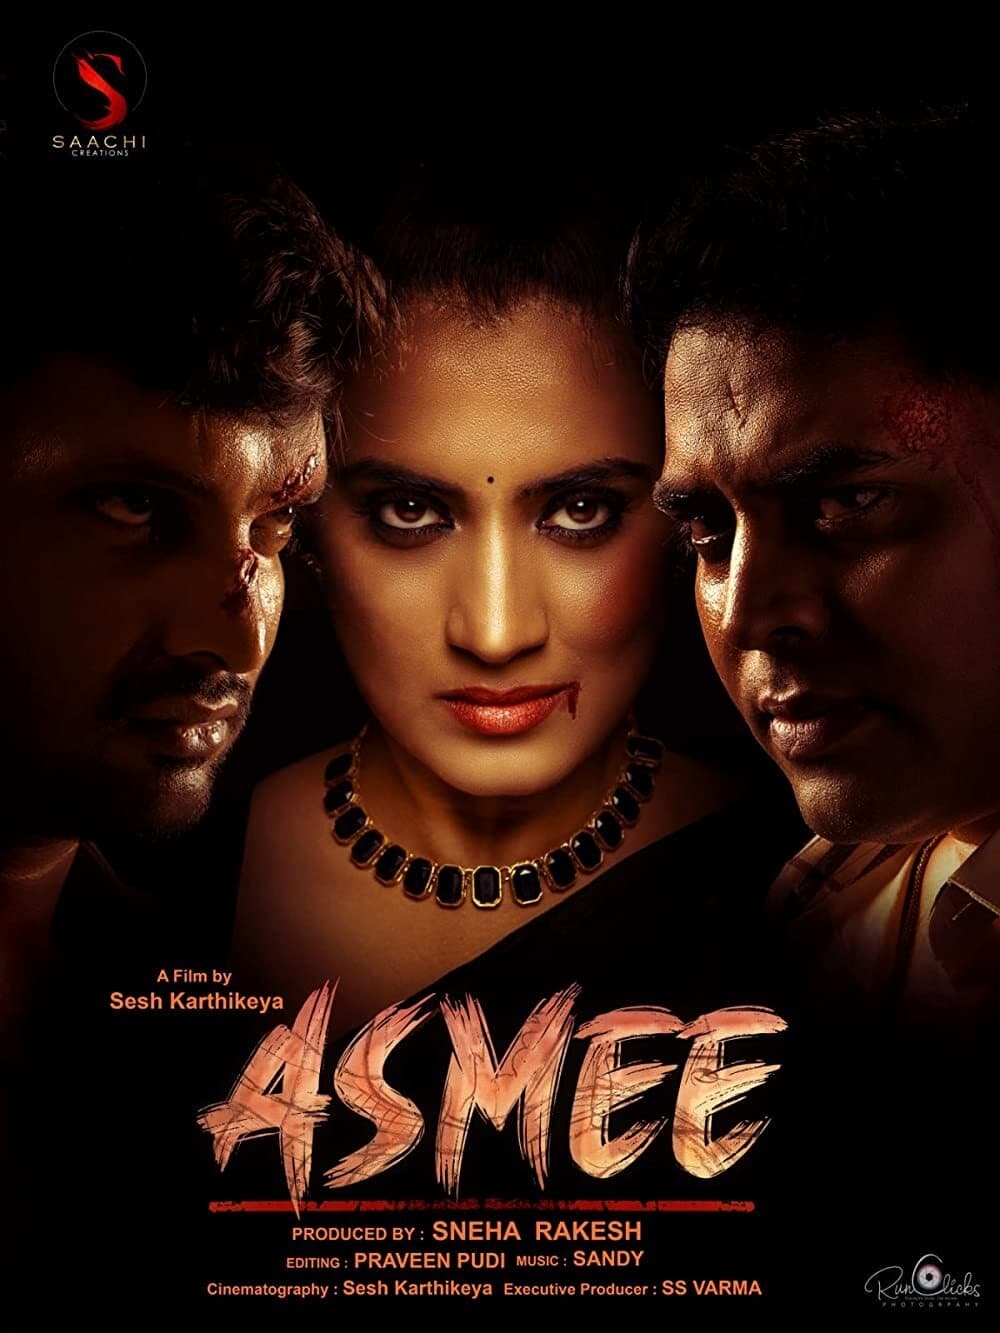 Poster for the movie "Asmee"